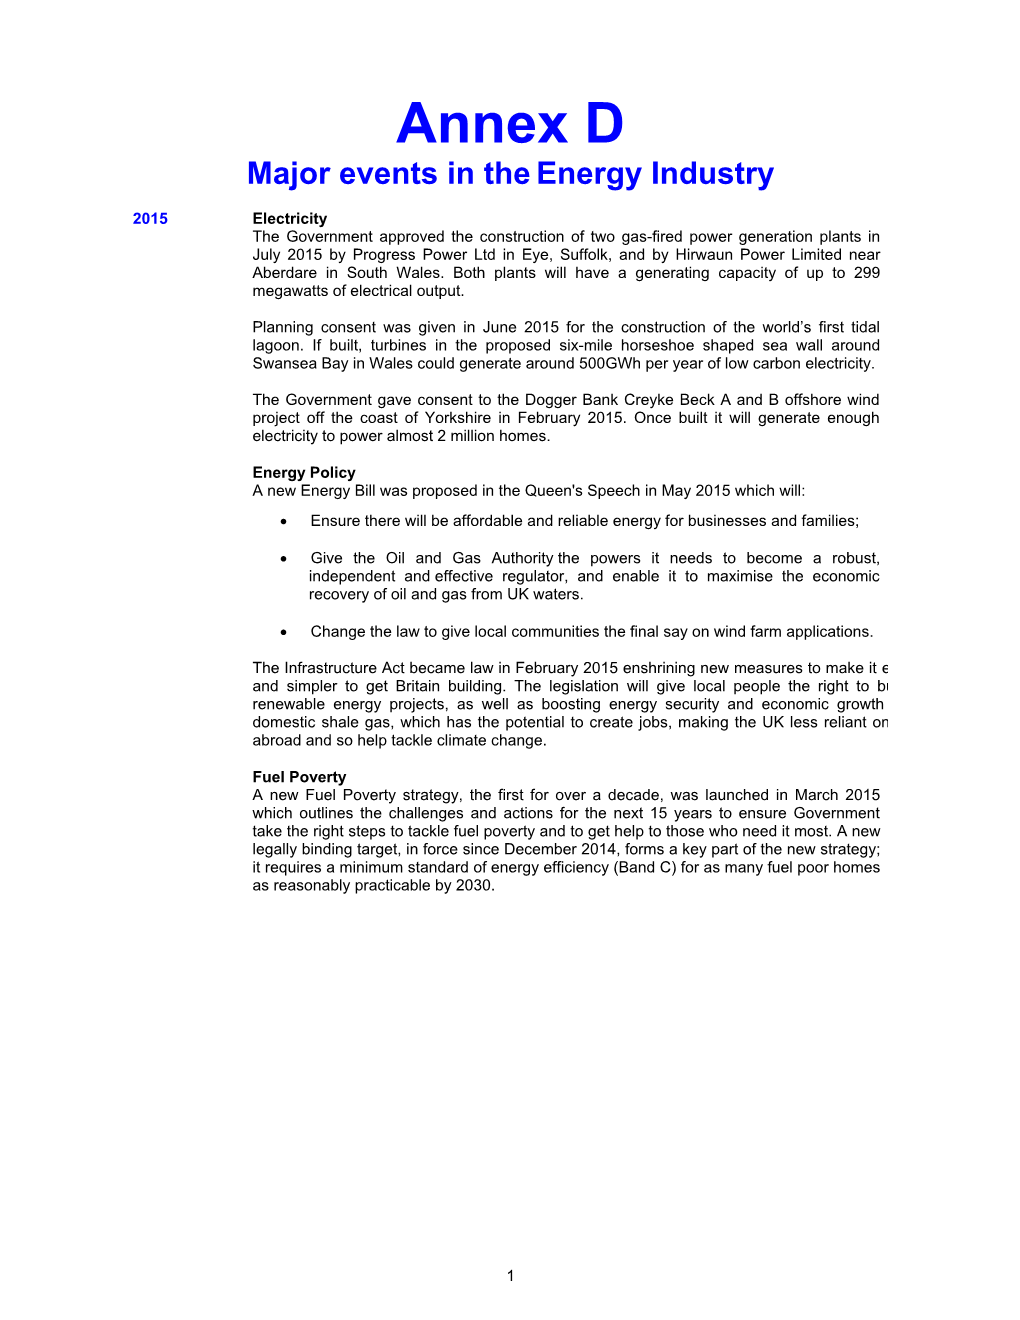 Annex D Major Events in the Energy Industry